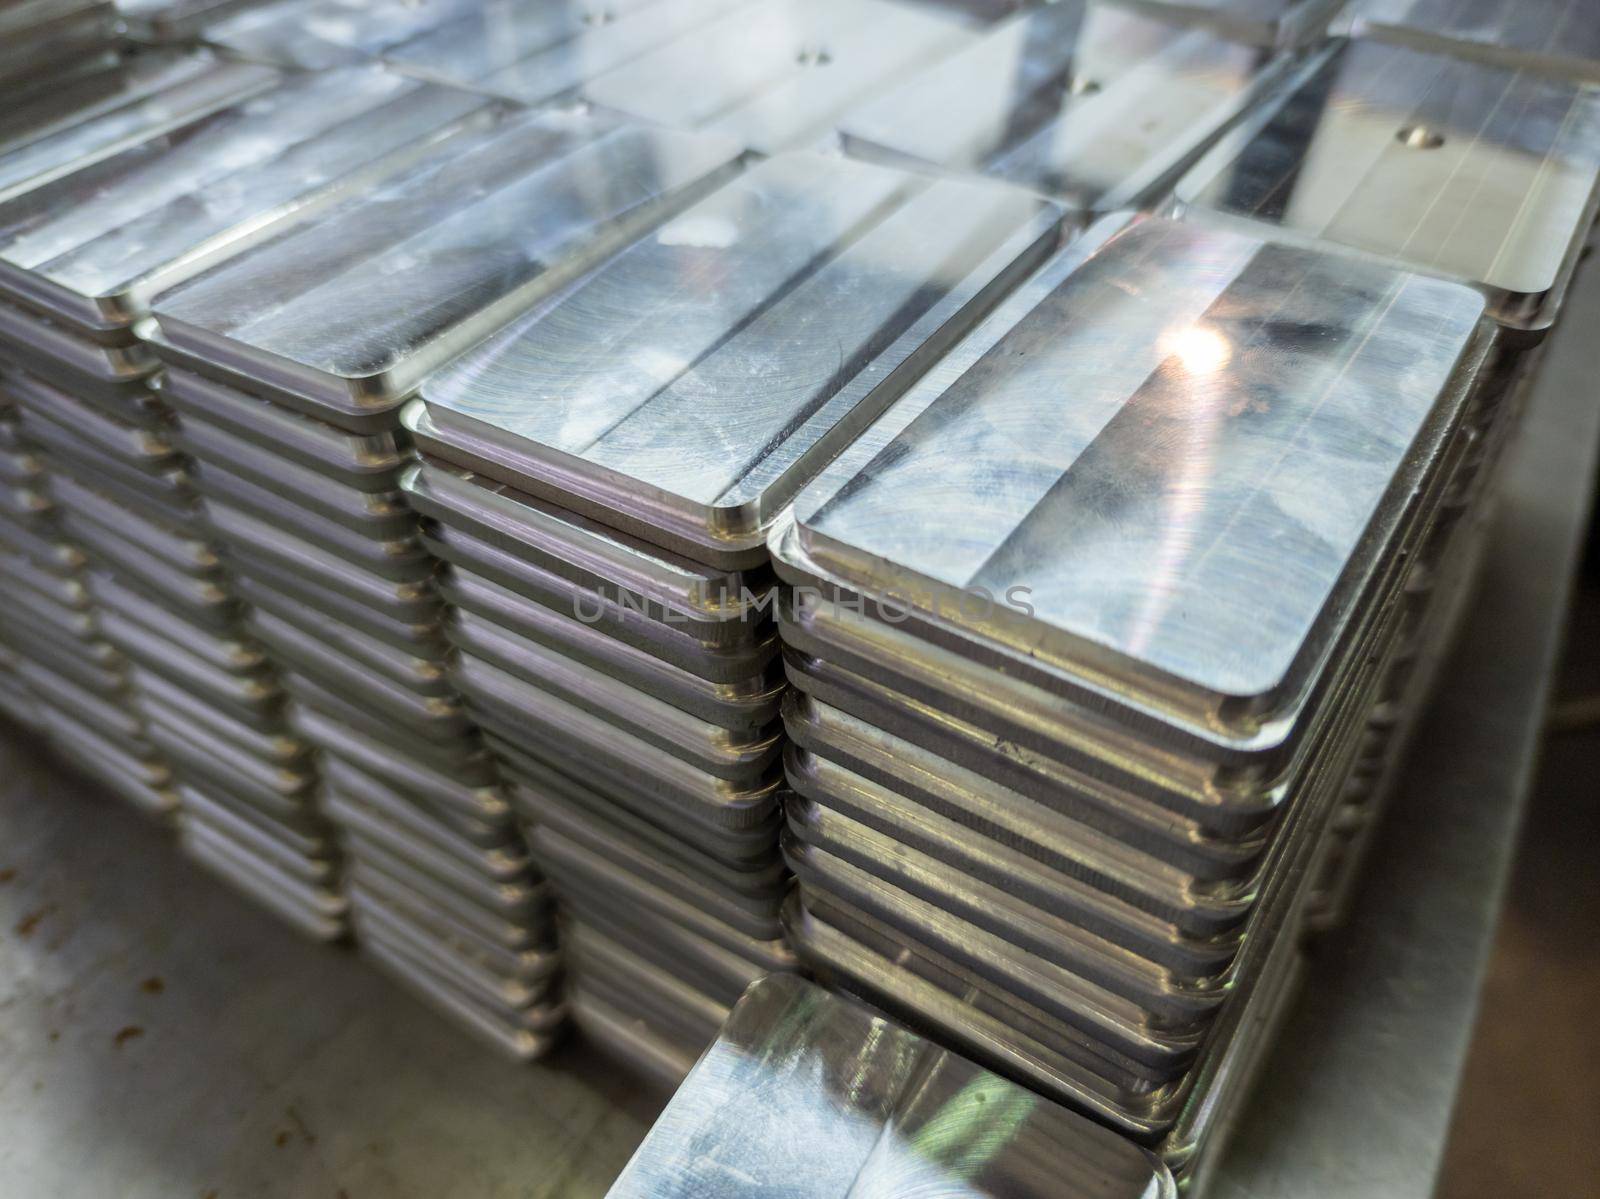 stacks of shiny metal tiles after cnc surface milling by z1b